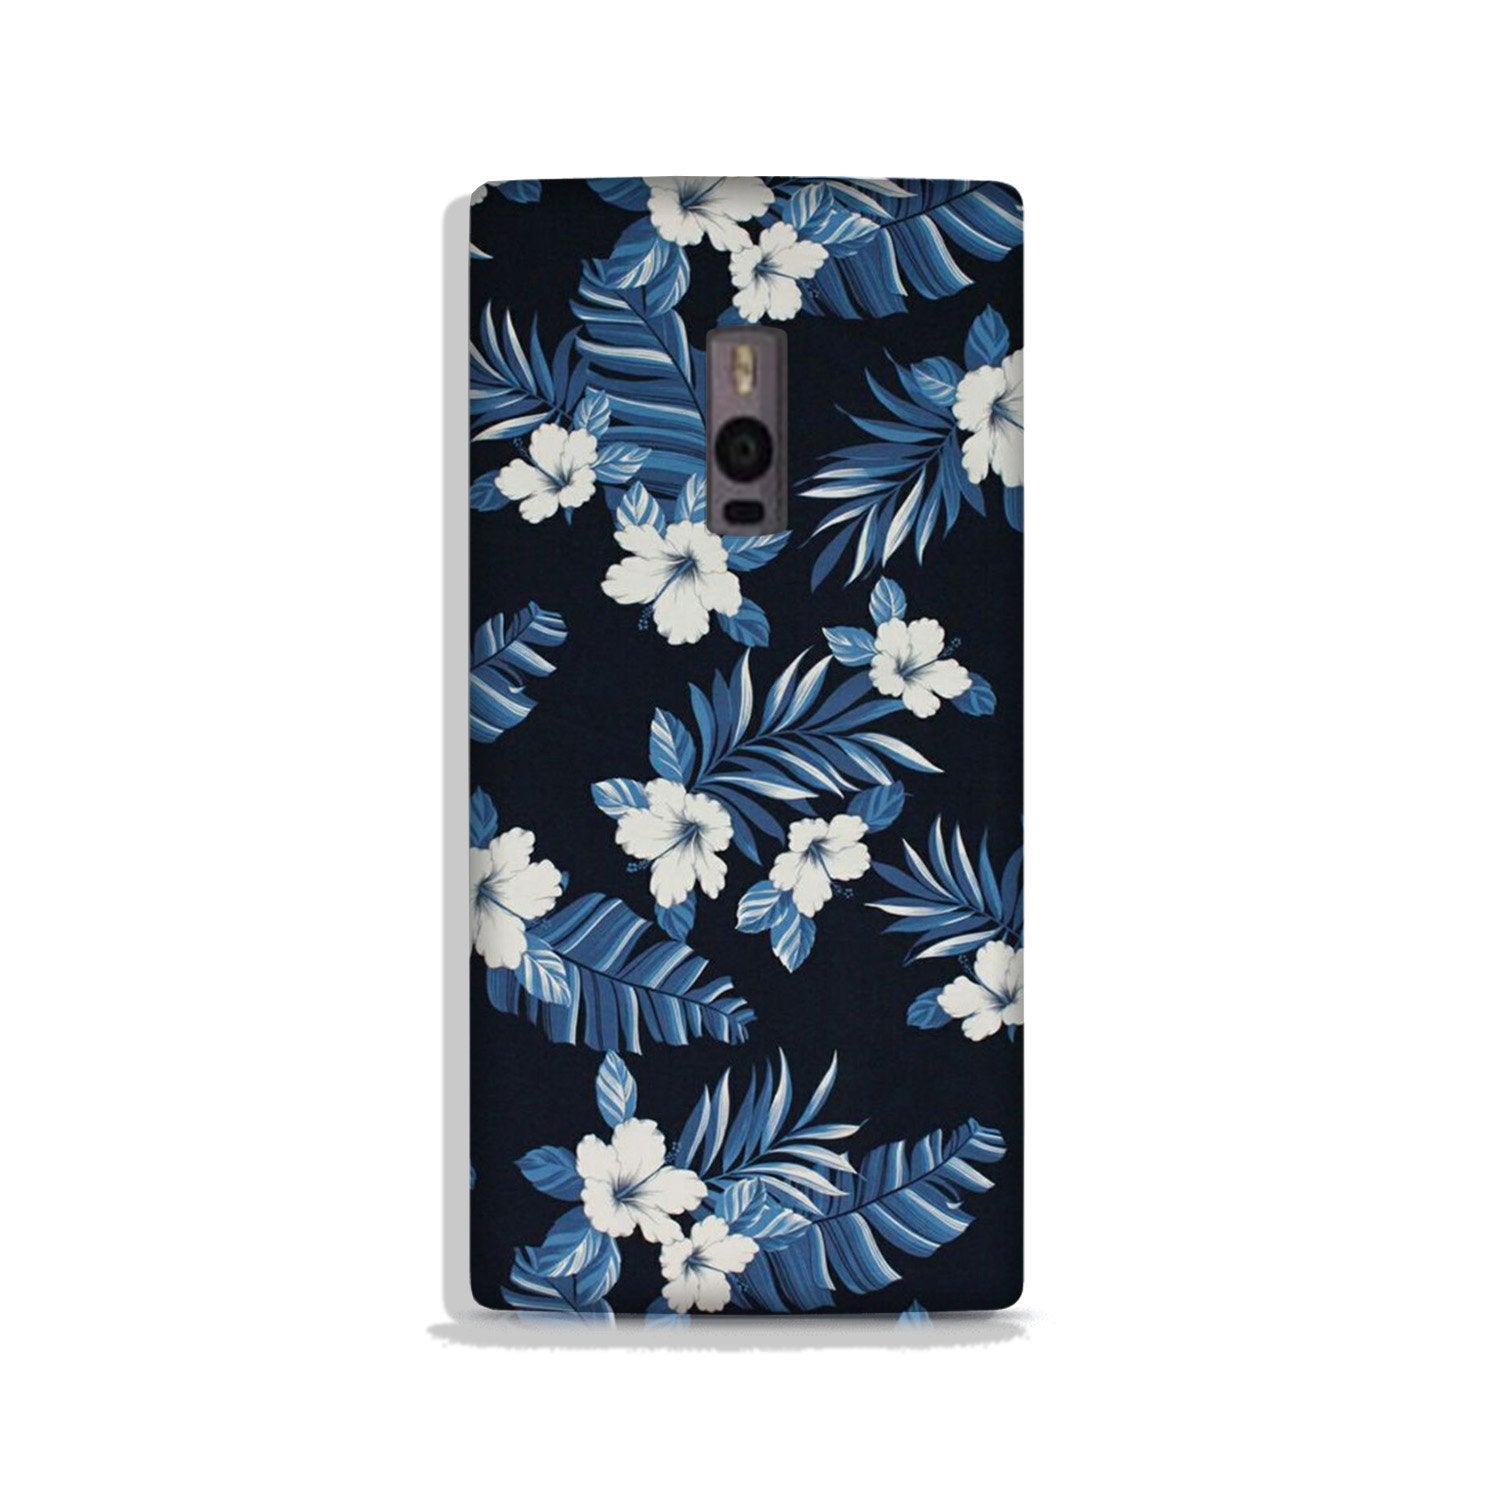 White flowers Blue Background2 Case for OnePlus 2